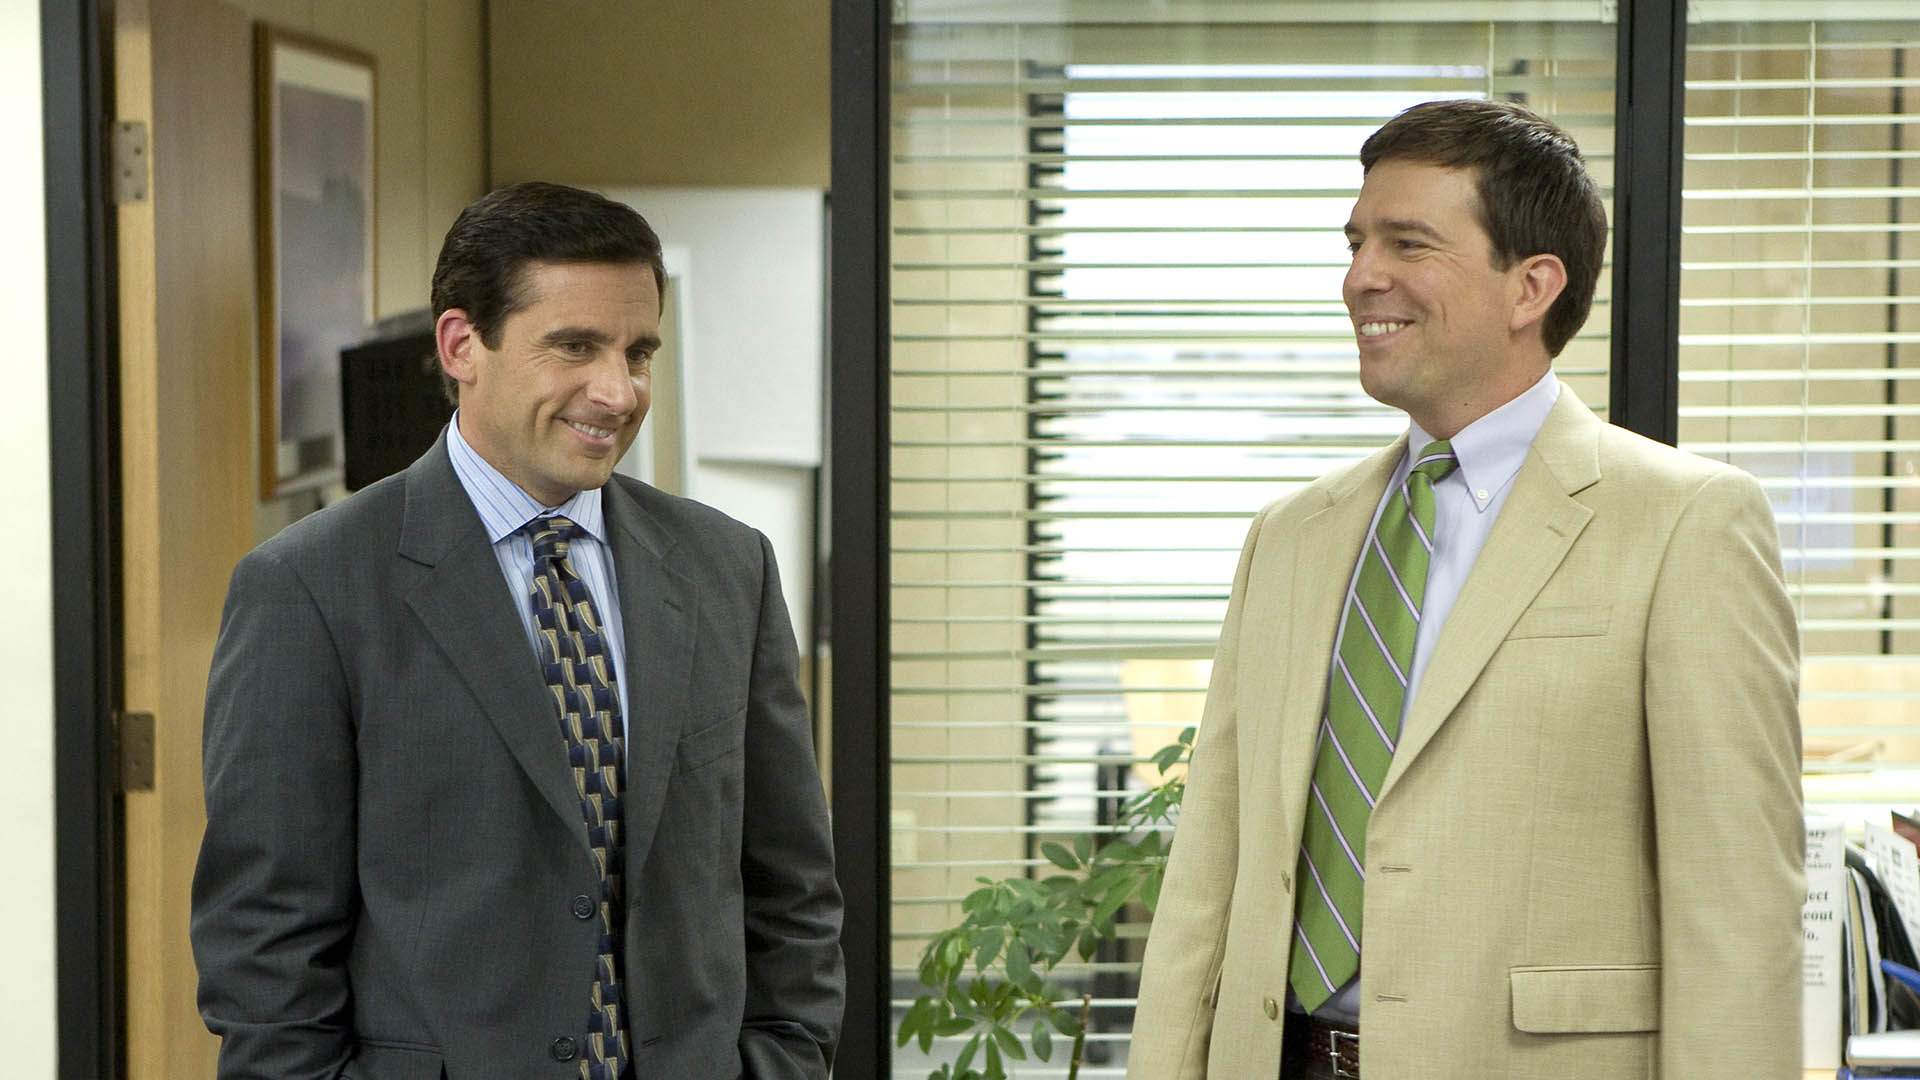 A Spinoff Sitcom Set in the Same Universe as 'The Office' Is on Its Way to Your Streaming Queue